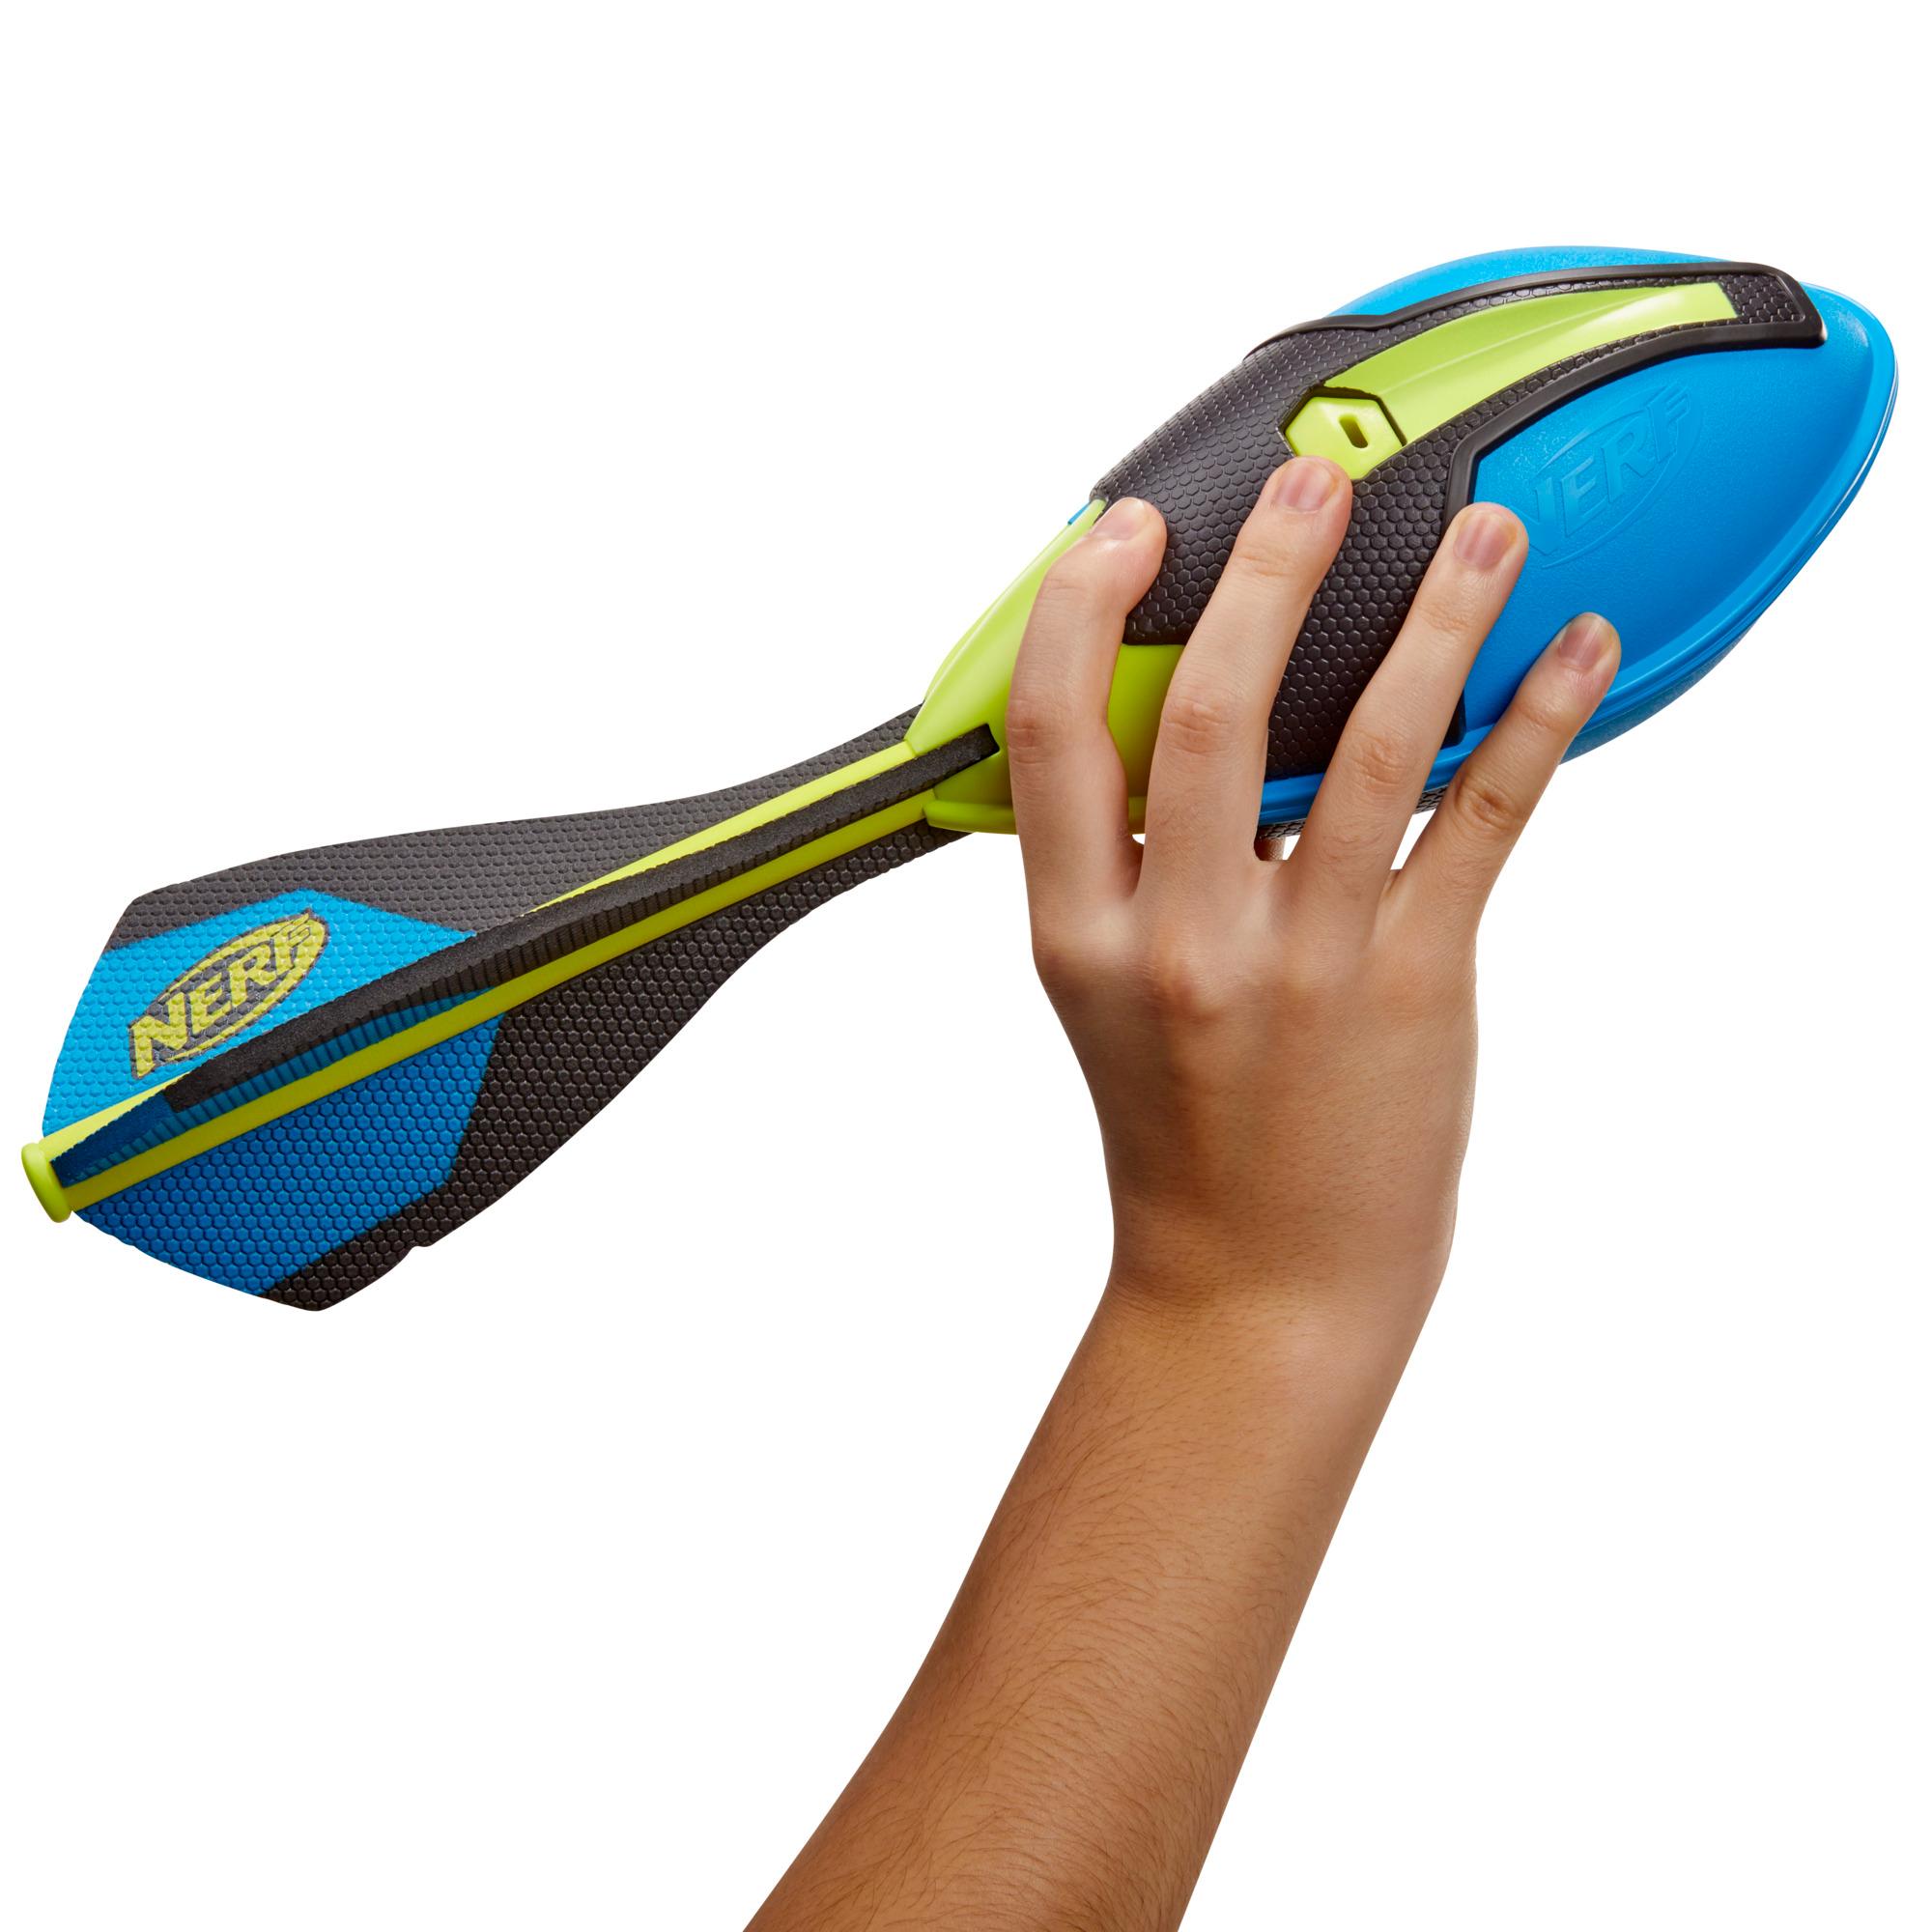 Nerf Vortex Ultra Grip Football, Designed for Easy Catching, Howling Whistle Sound, Distance-Optimizing Tail